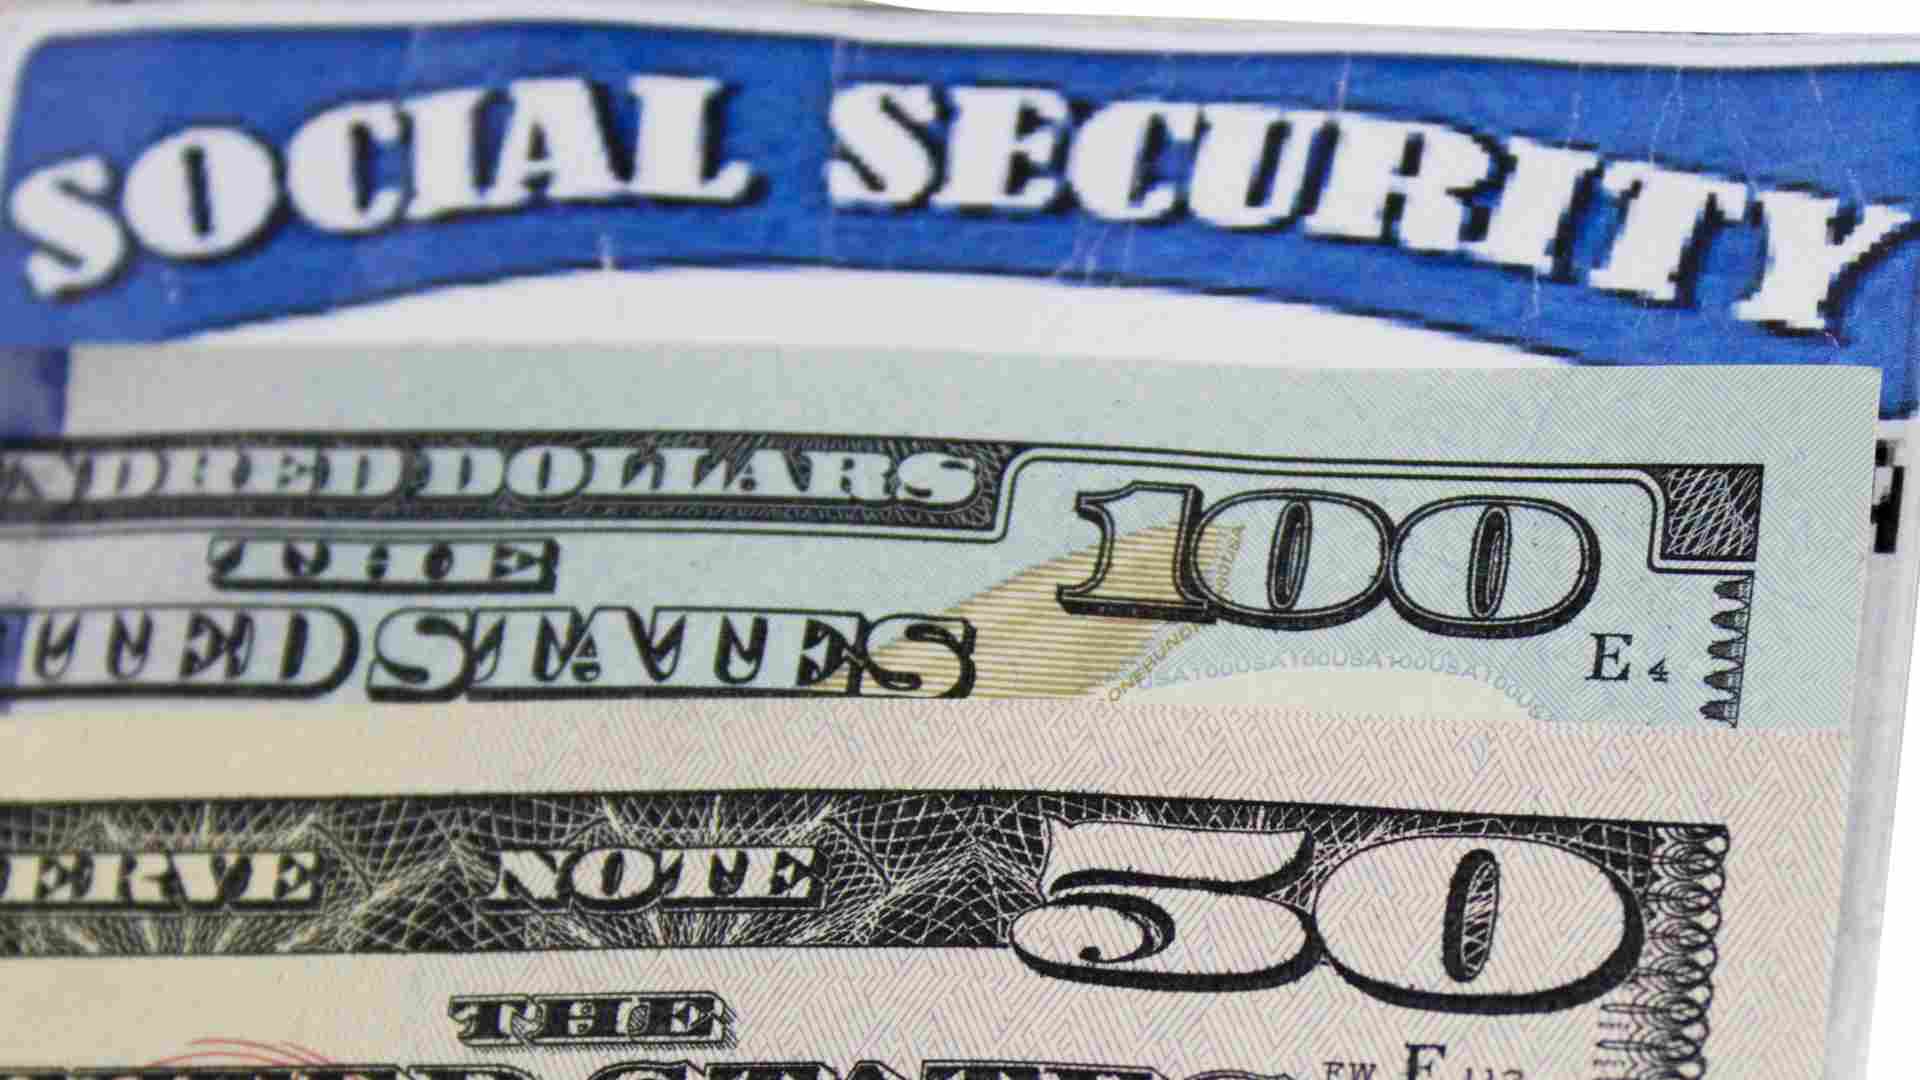 A new payment is coming soon for survivors, Social Security confirms it